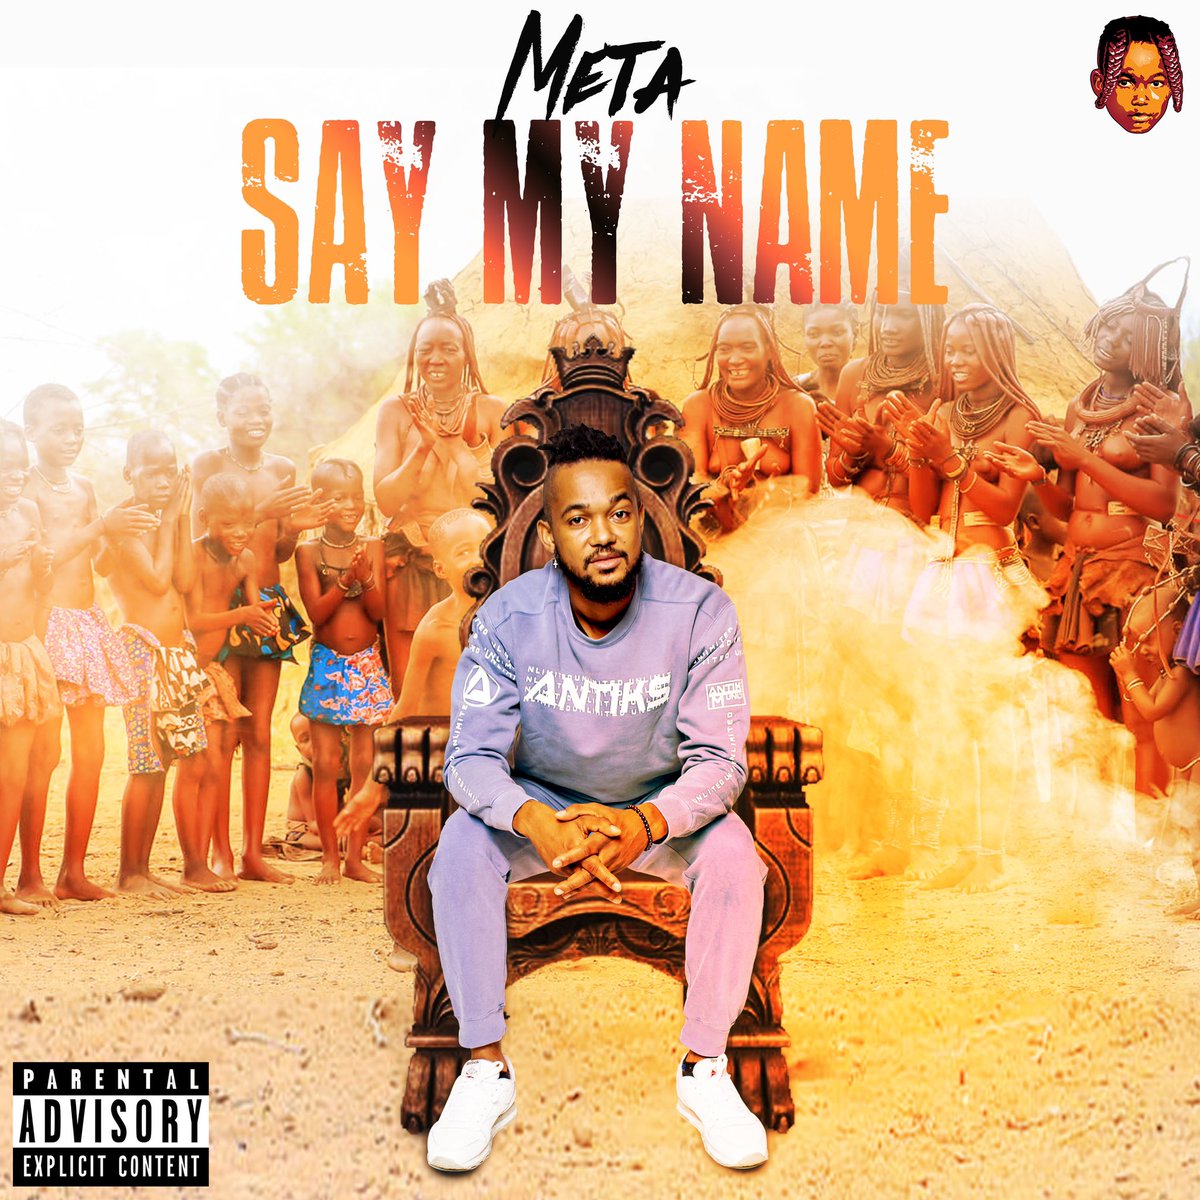 New single alert 🚨 🚨🚨🚨🚨🚨
Dropping my first track of the year “Say My Name” prod by @YoungNataraj on Monday 3/29/21!!!!!
Share the shit out of this for me 🙏🏾 and let’s get hype for this drop!!!!
#newmusiccomingsoon #newsinglecomingsoon #afrohiphop #namibianmusic #saymyname